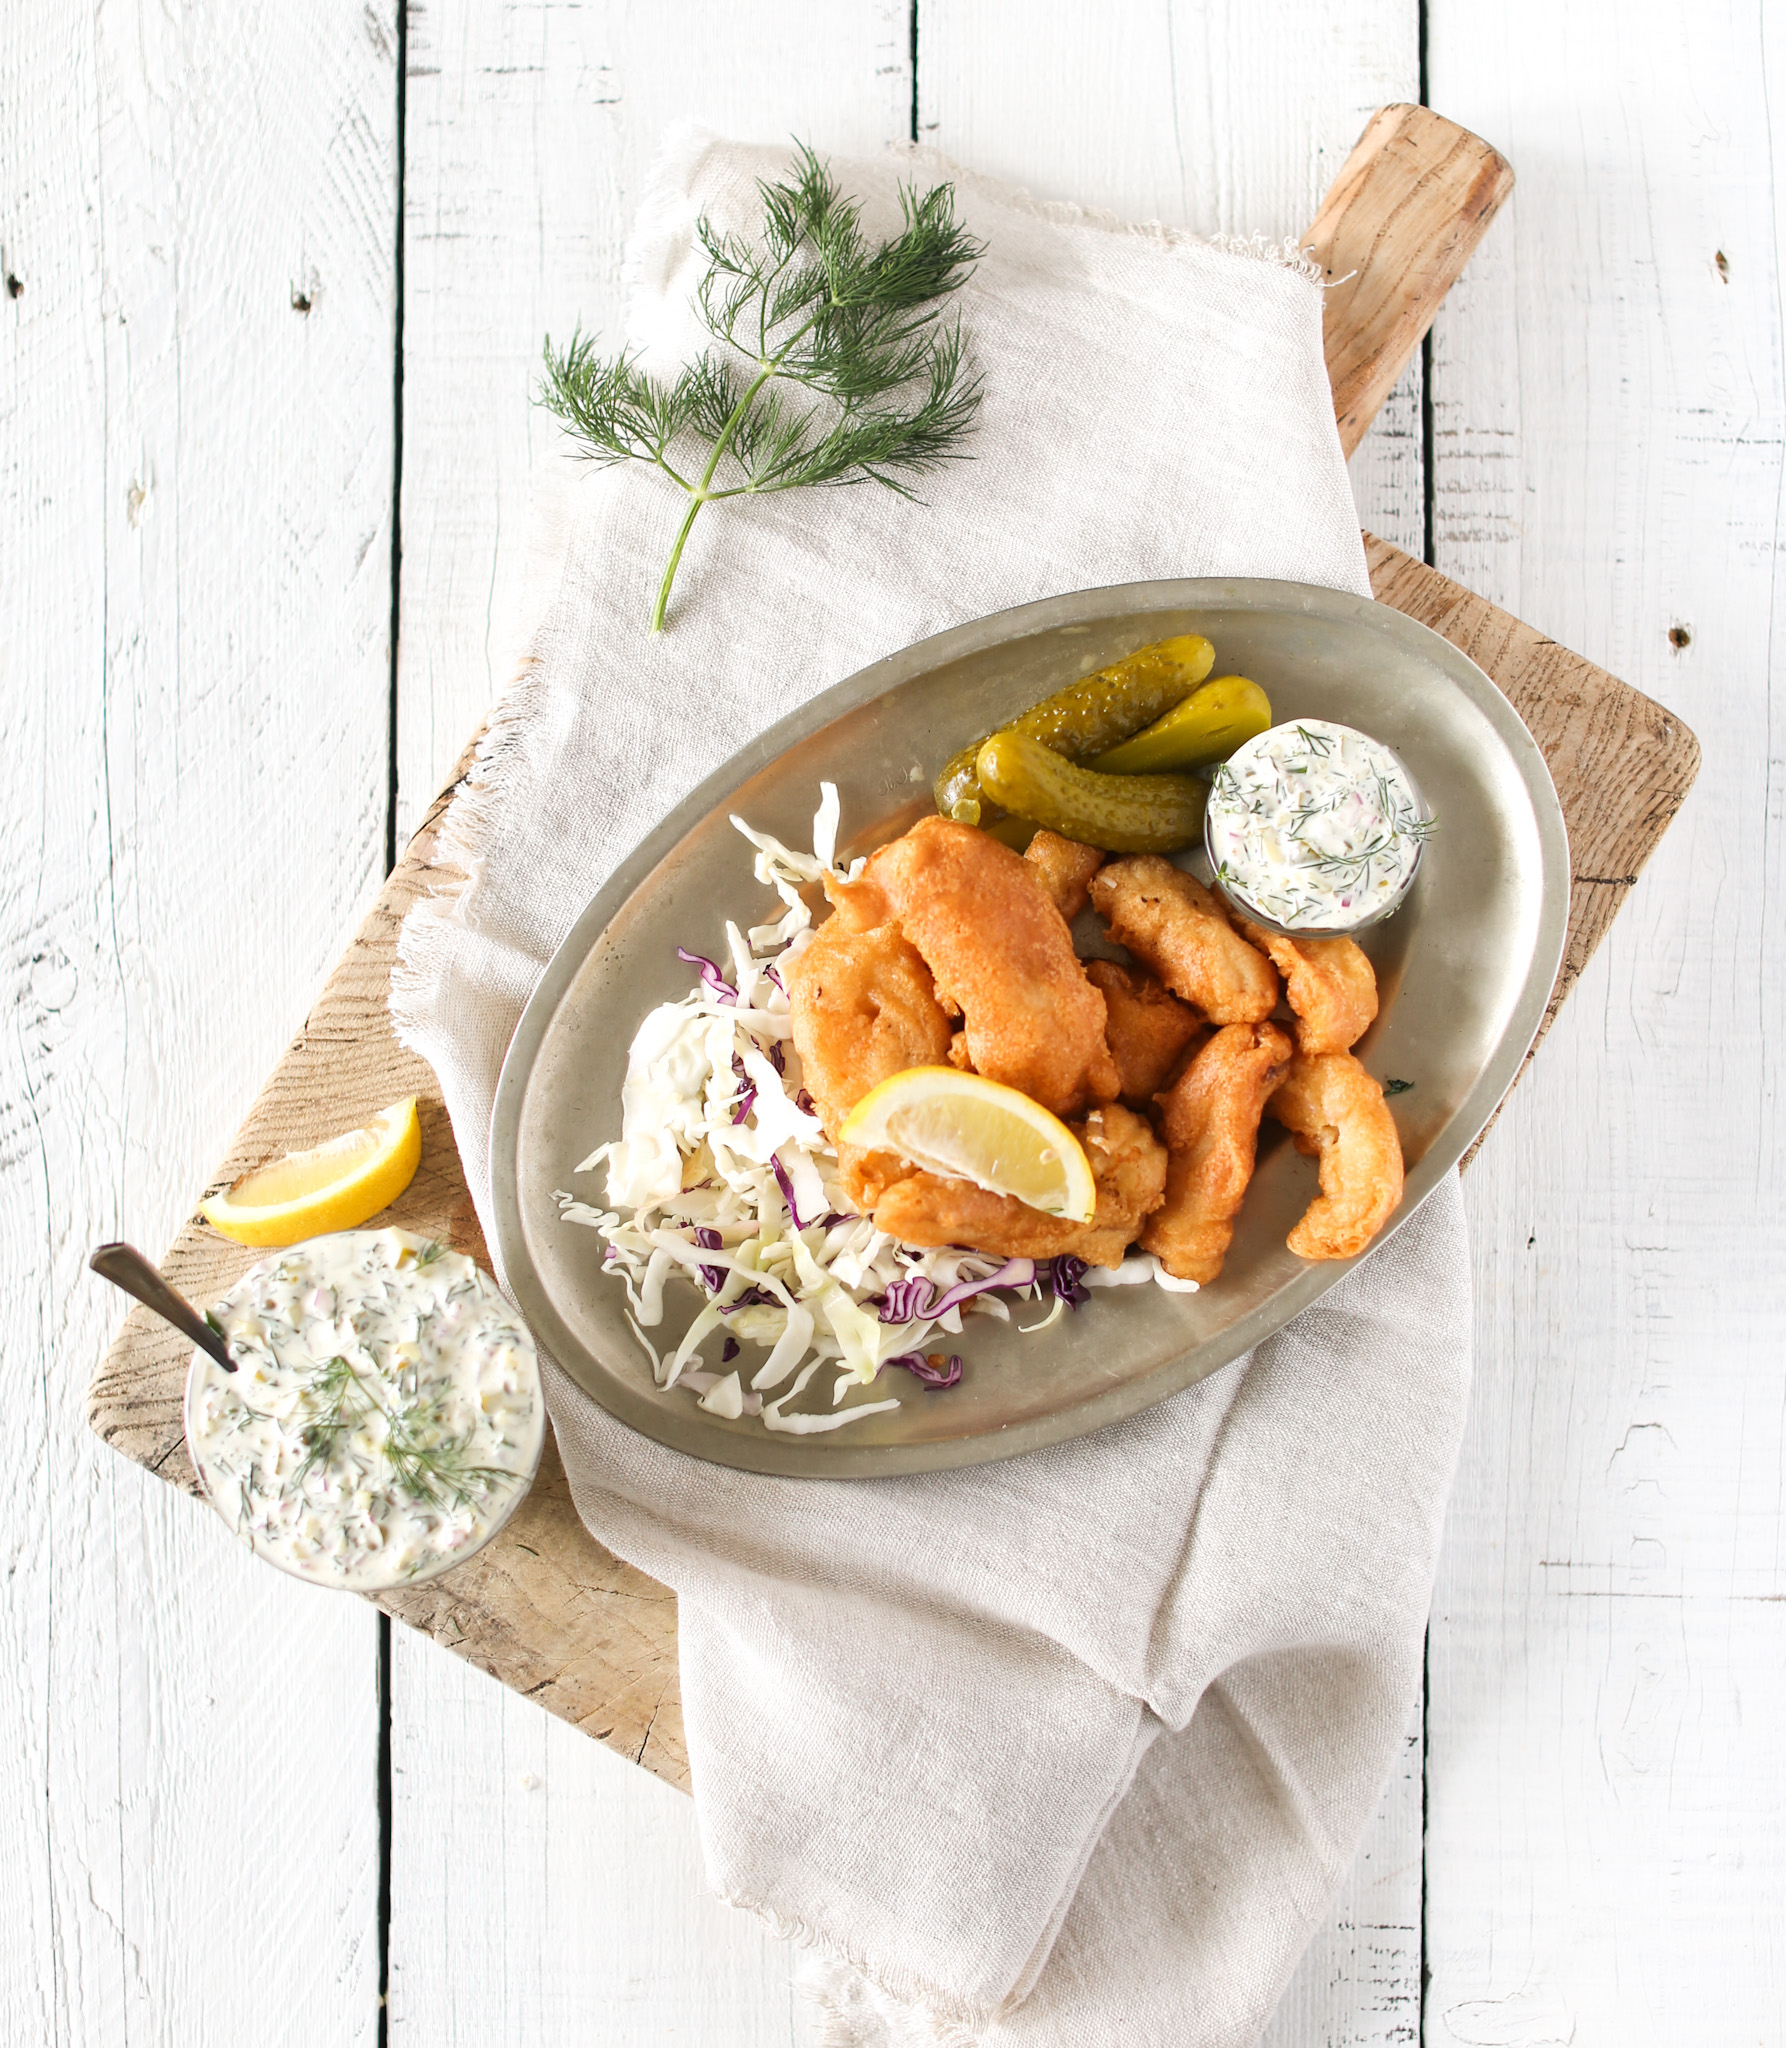 Homemade Dill Tartar Sauce serve with lemon, pickles and fried fish